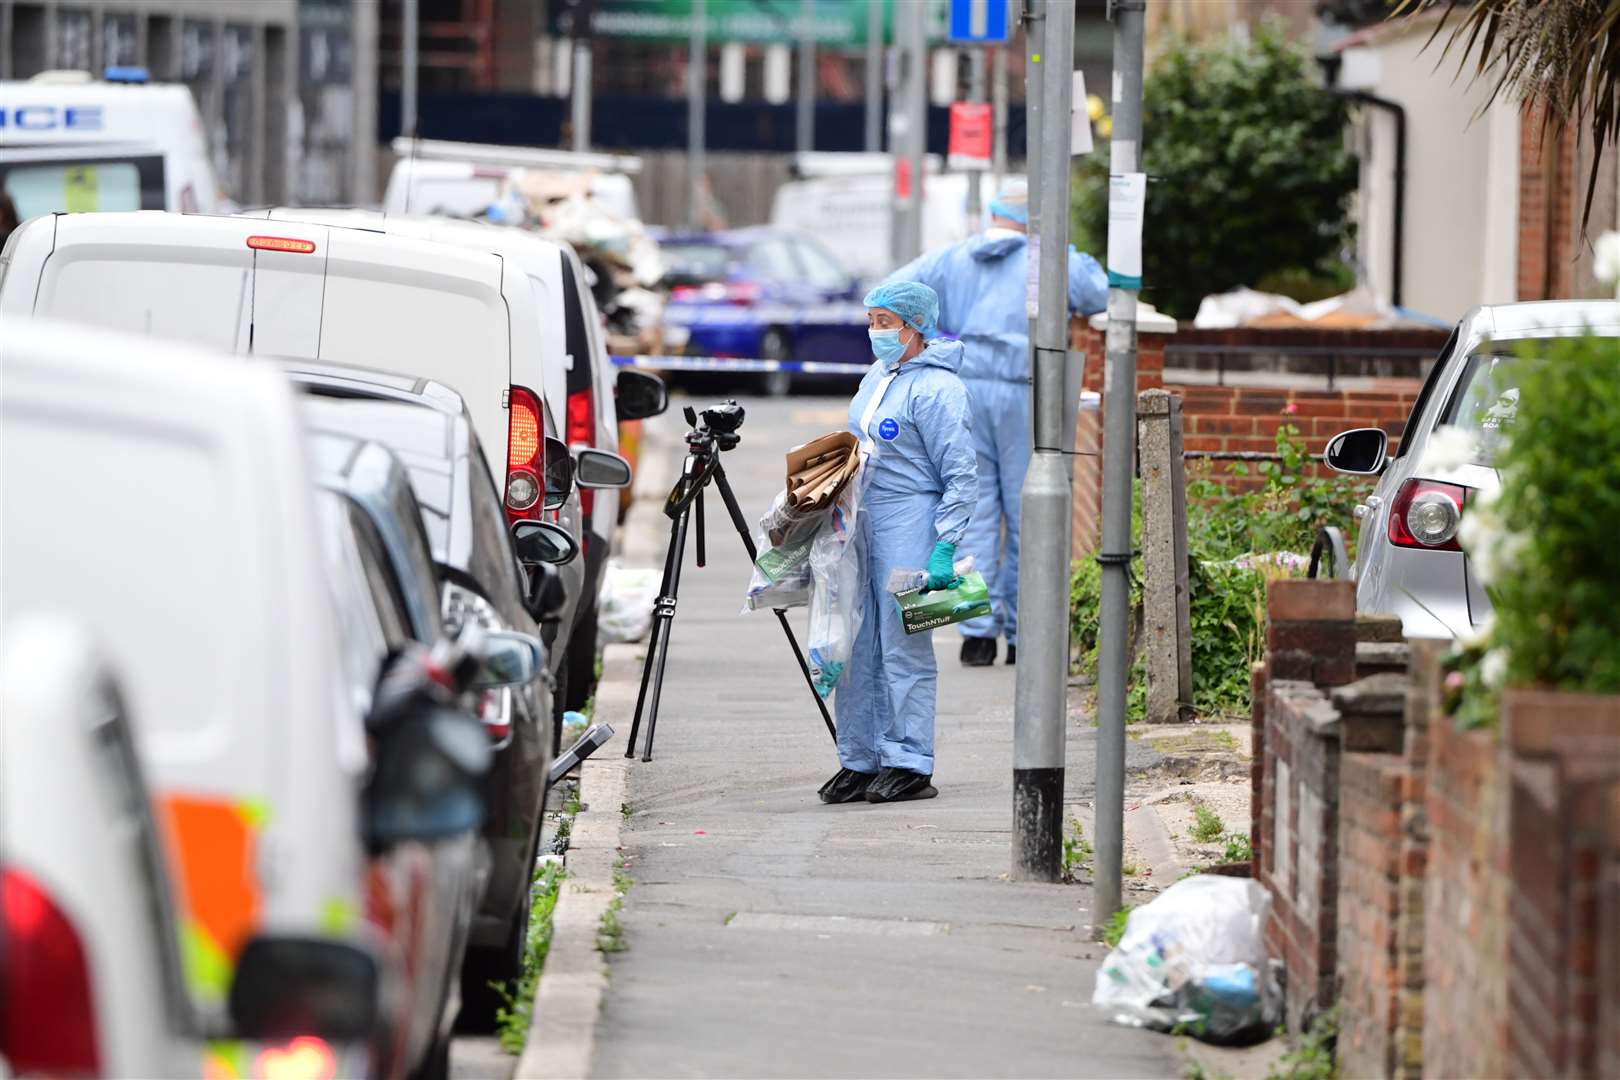 Forensic officers are at the scene (Ian West/PA)